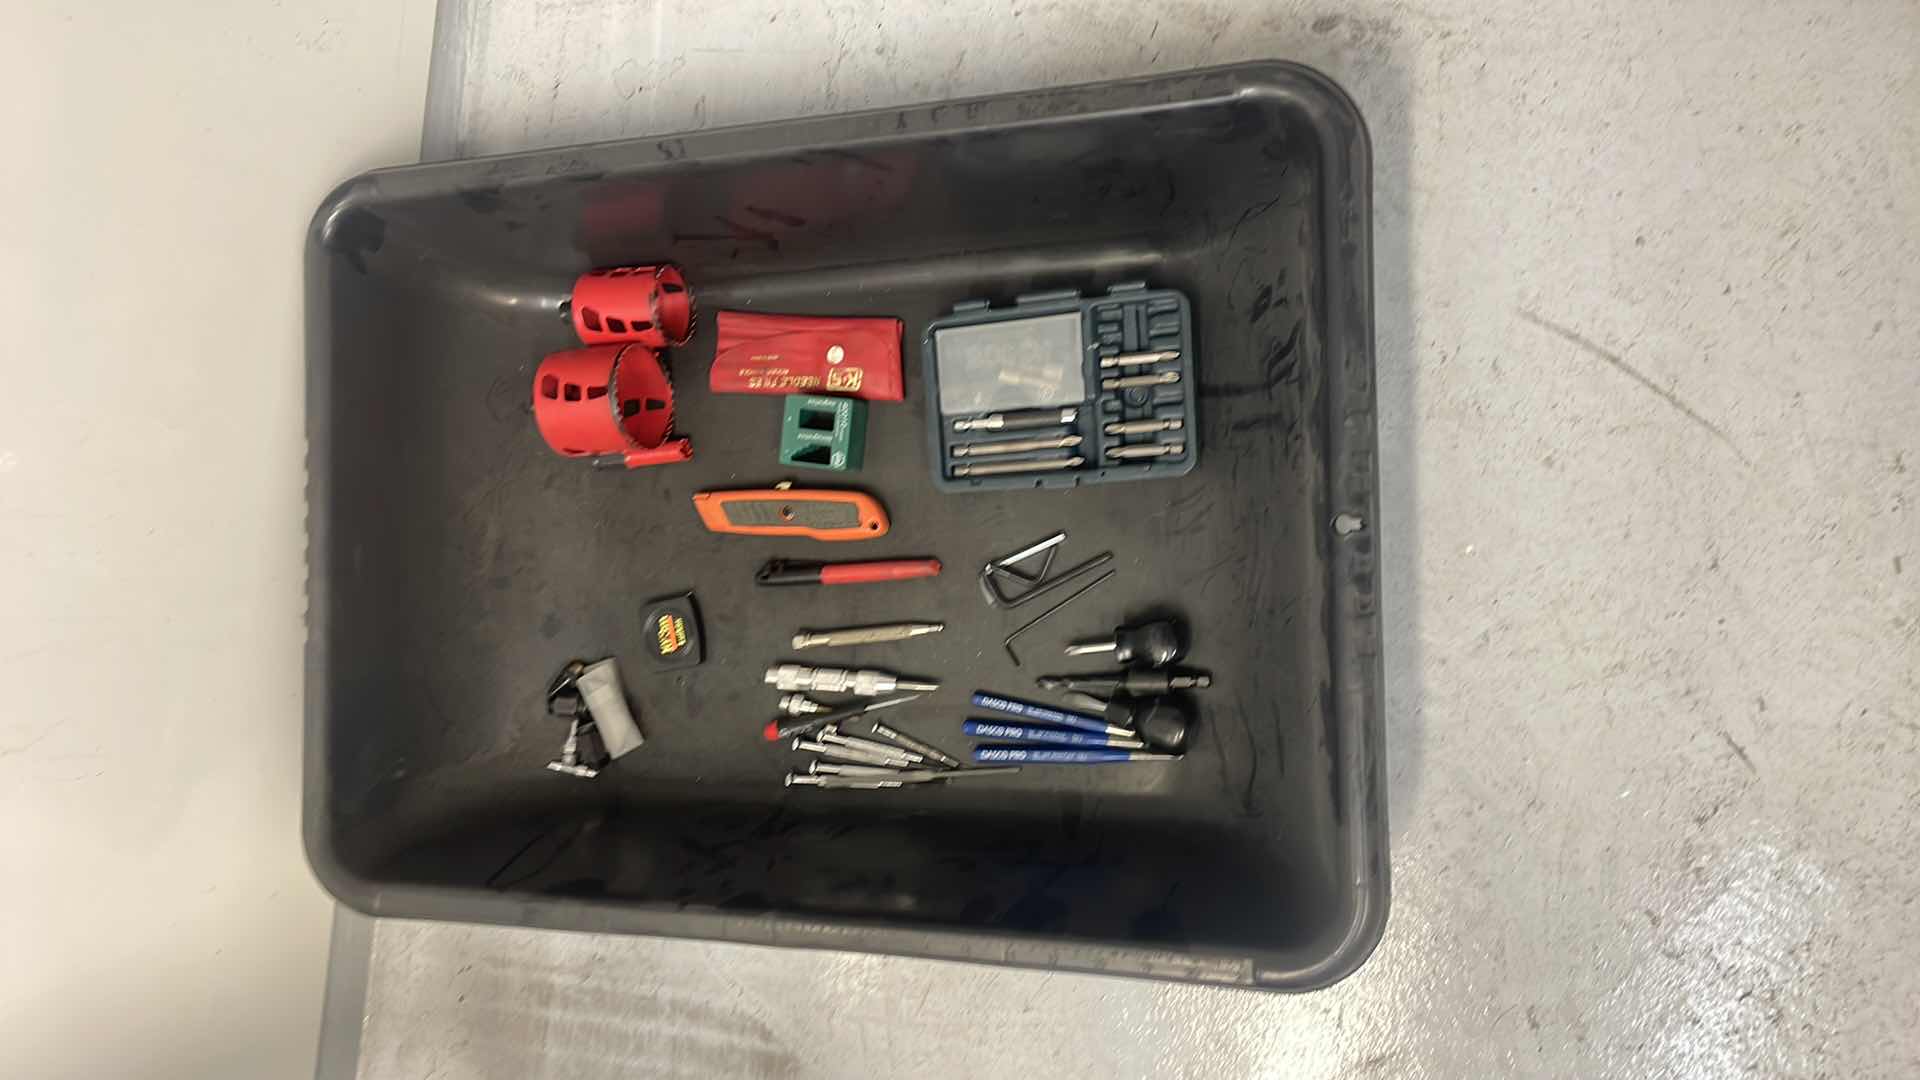 Photo 1 of MISC TOOLS IN 20” x 28” TUB